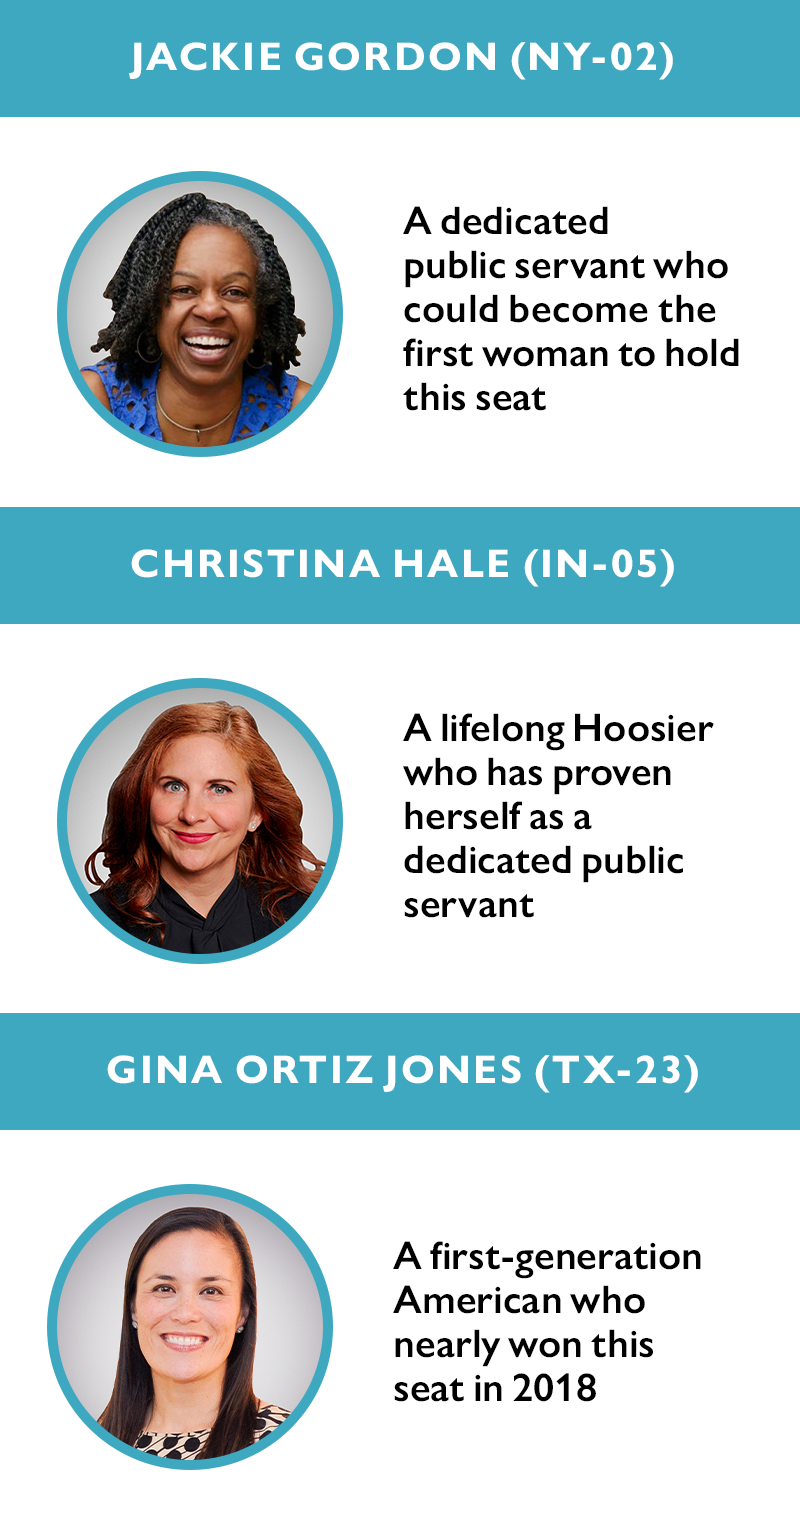 Jackie Gordon (NY-02)
A dedicated public servant who could become the first woman to hold this seat

Christina Hale (IN-05) 
A lifelong Hoosier who has proven herself as a dedicated public servant

Gina Ortiz Jones (TX-23) 
A first-generation American who nearly won this seat in 2018